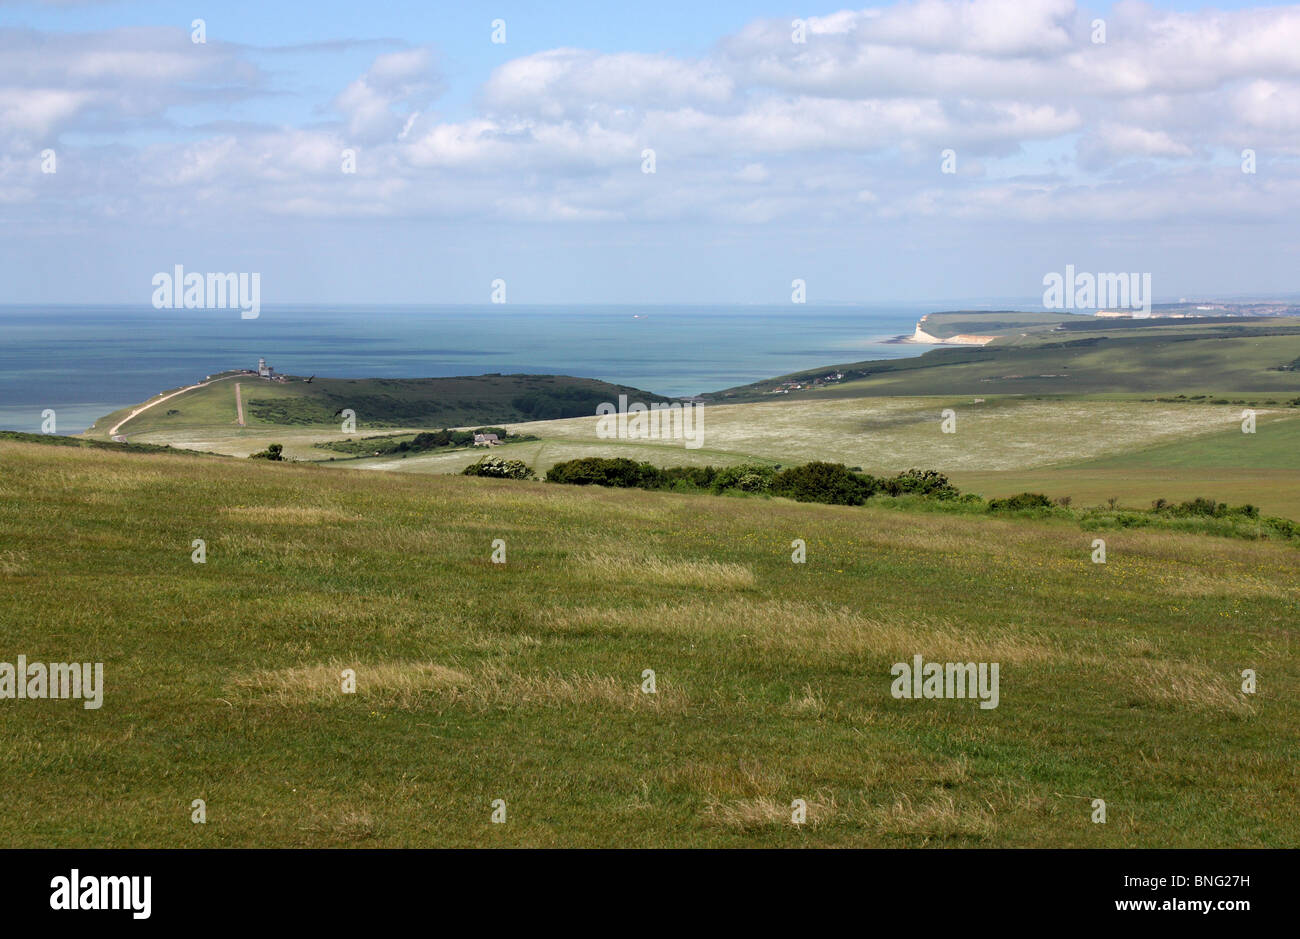 Landscape/seascape near Beachy Head, Sussex, UK. A quiet and peaceful place where no animals or people could be found. The sea was like a millpool. Stock Photo